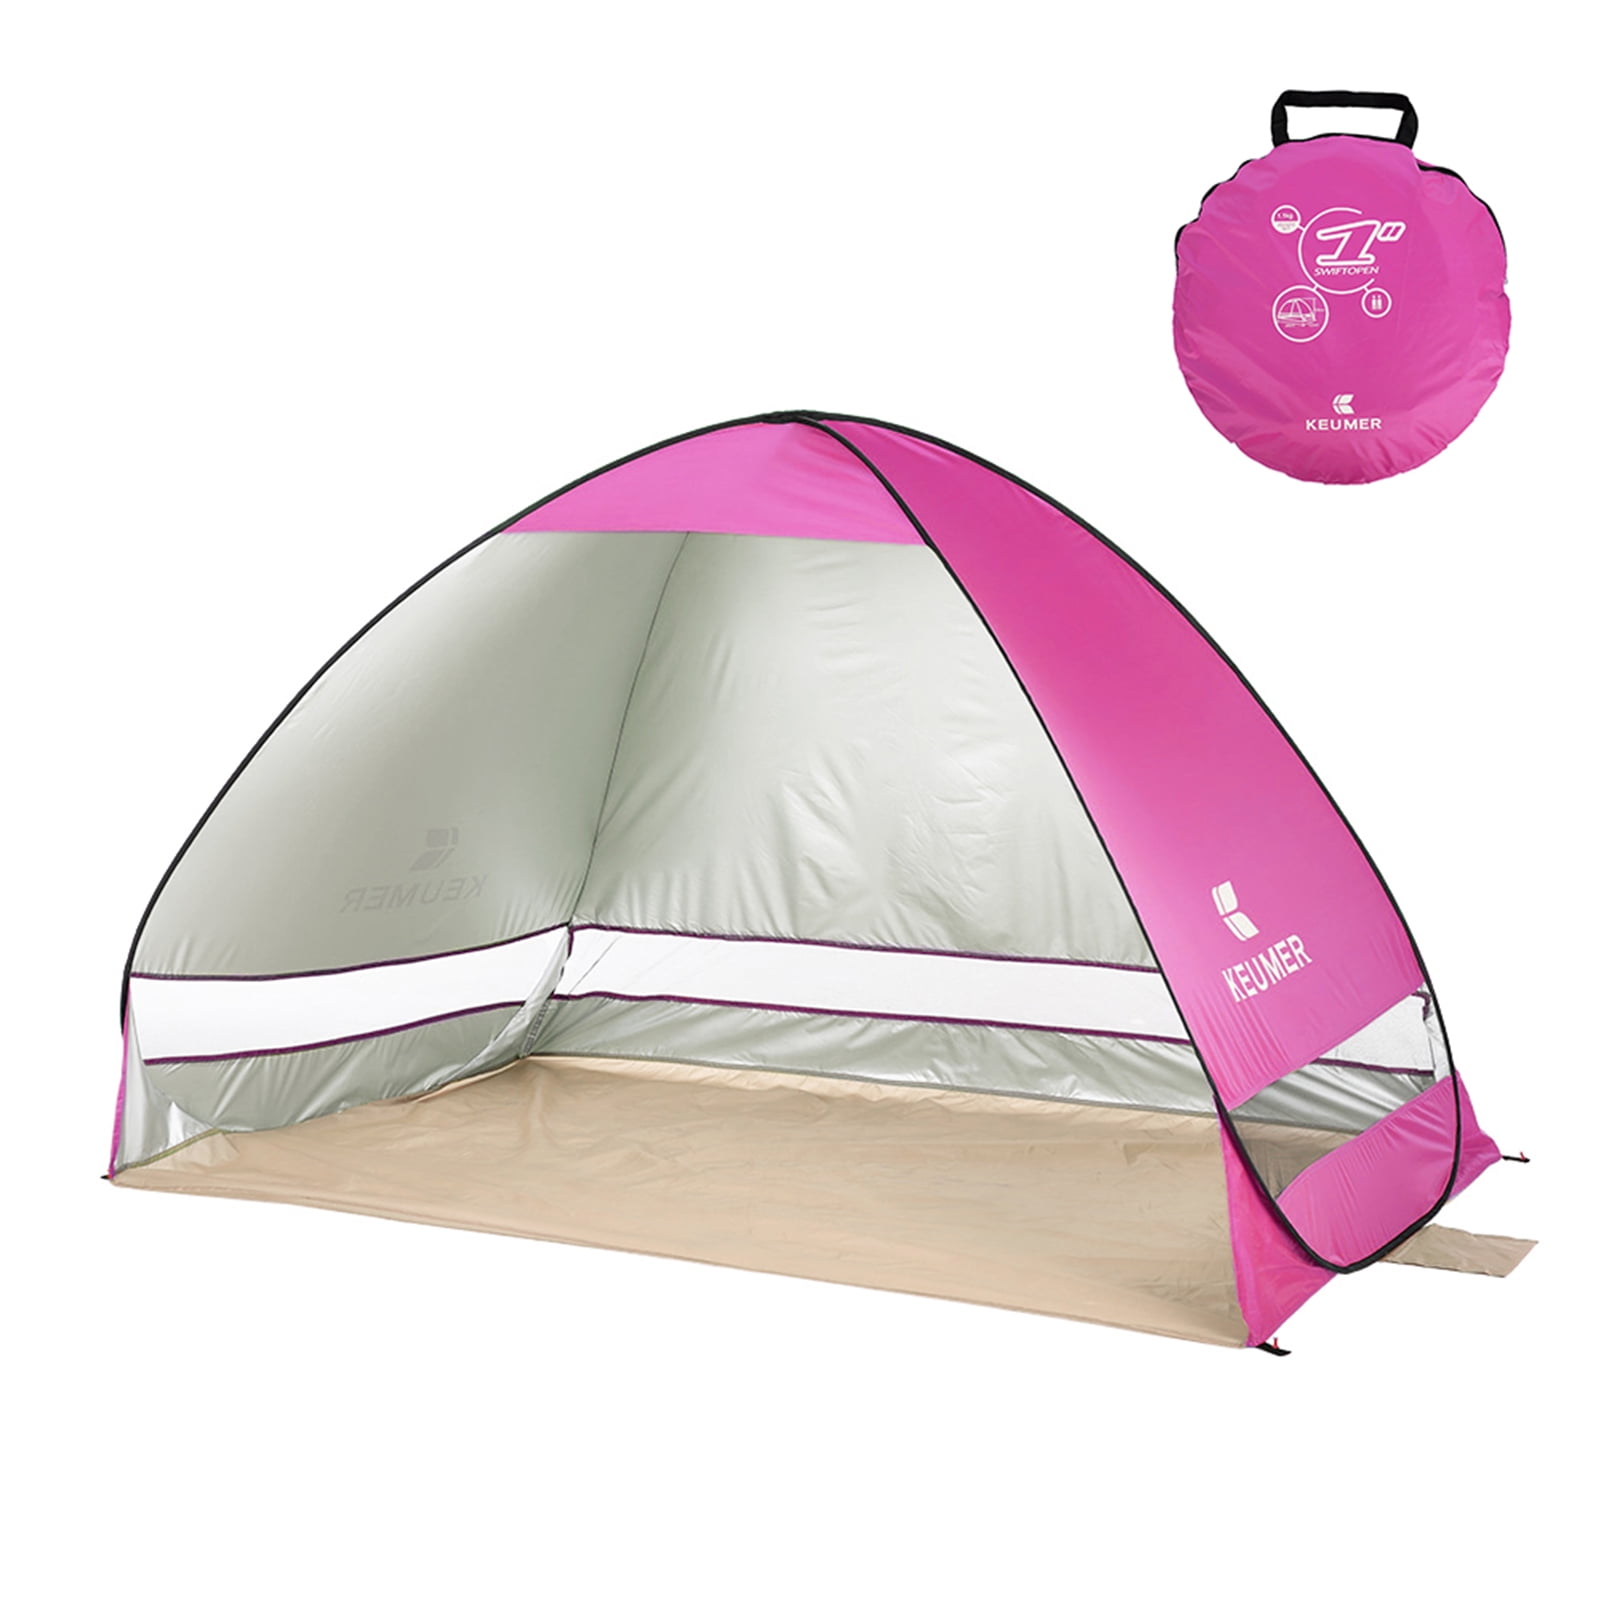 Eplze® Automatic Pop Up Beach Tent Instant Portable Quick Cabana Sun Shelter for 2-3 Person 